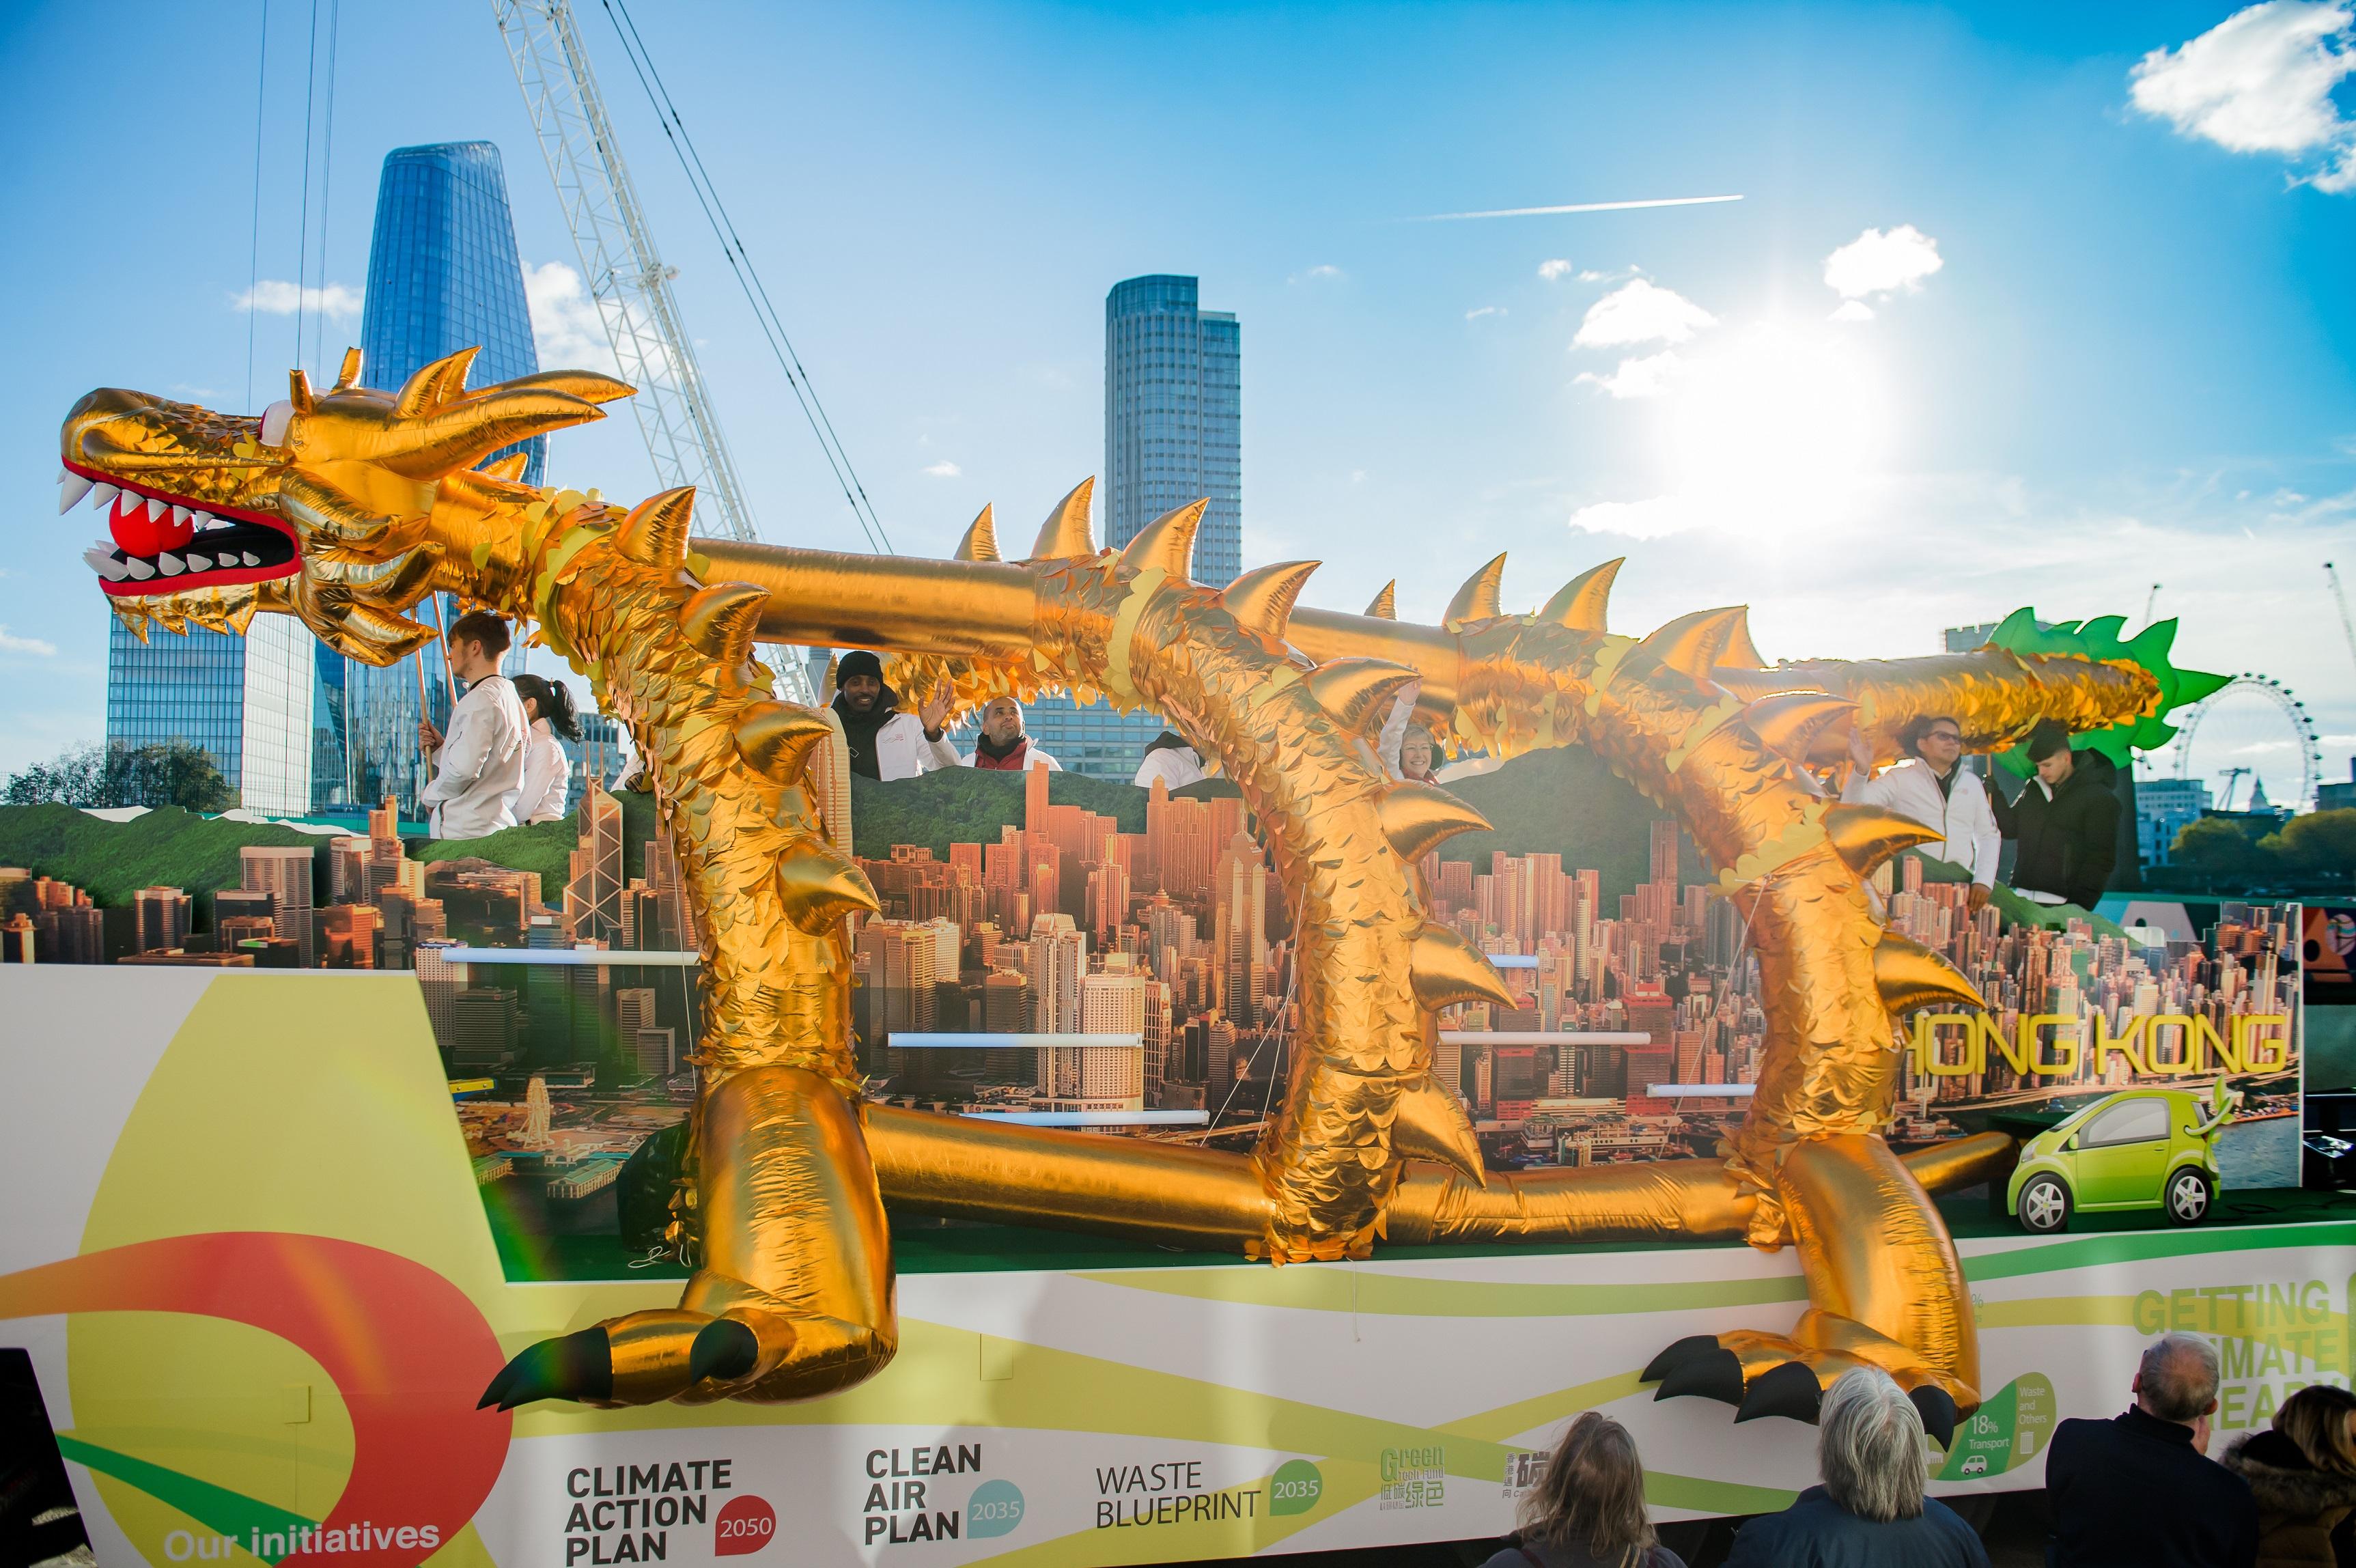 The Hong Kong Economic and Trade Office, London took part in the City of London Lord Mayor's Show on November 11 (London time) with a float highlighting Hong Kong's plan to achieve carbon neutrality before 2050. Photo shows the float passing the Victoria Embankment in London.